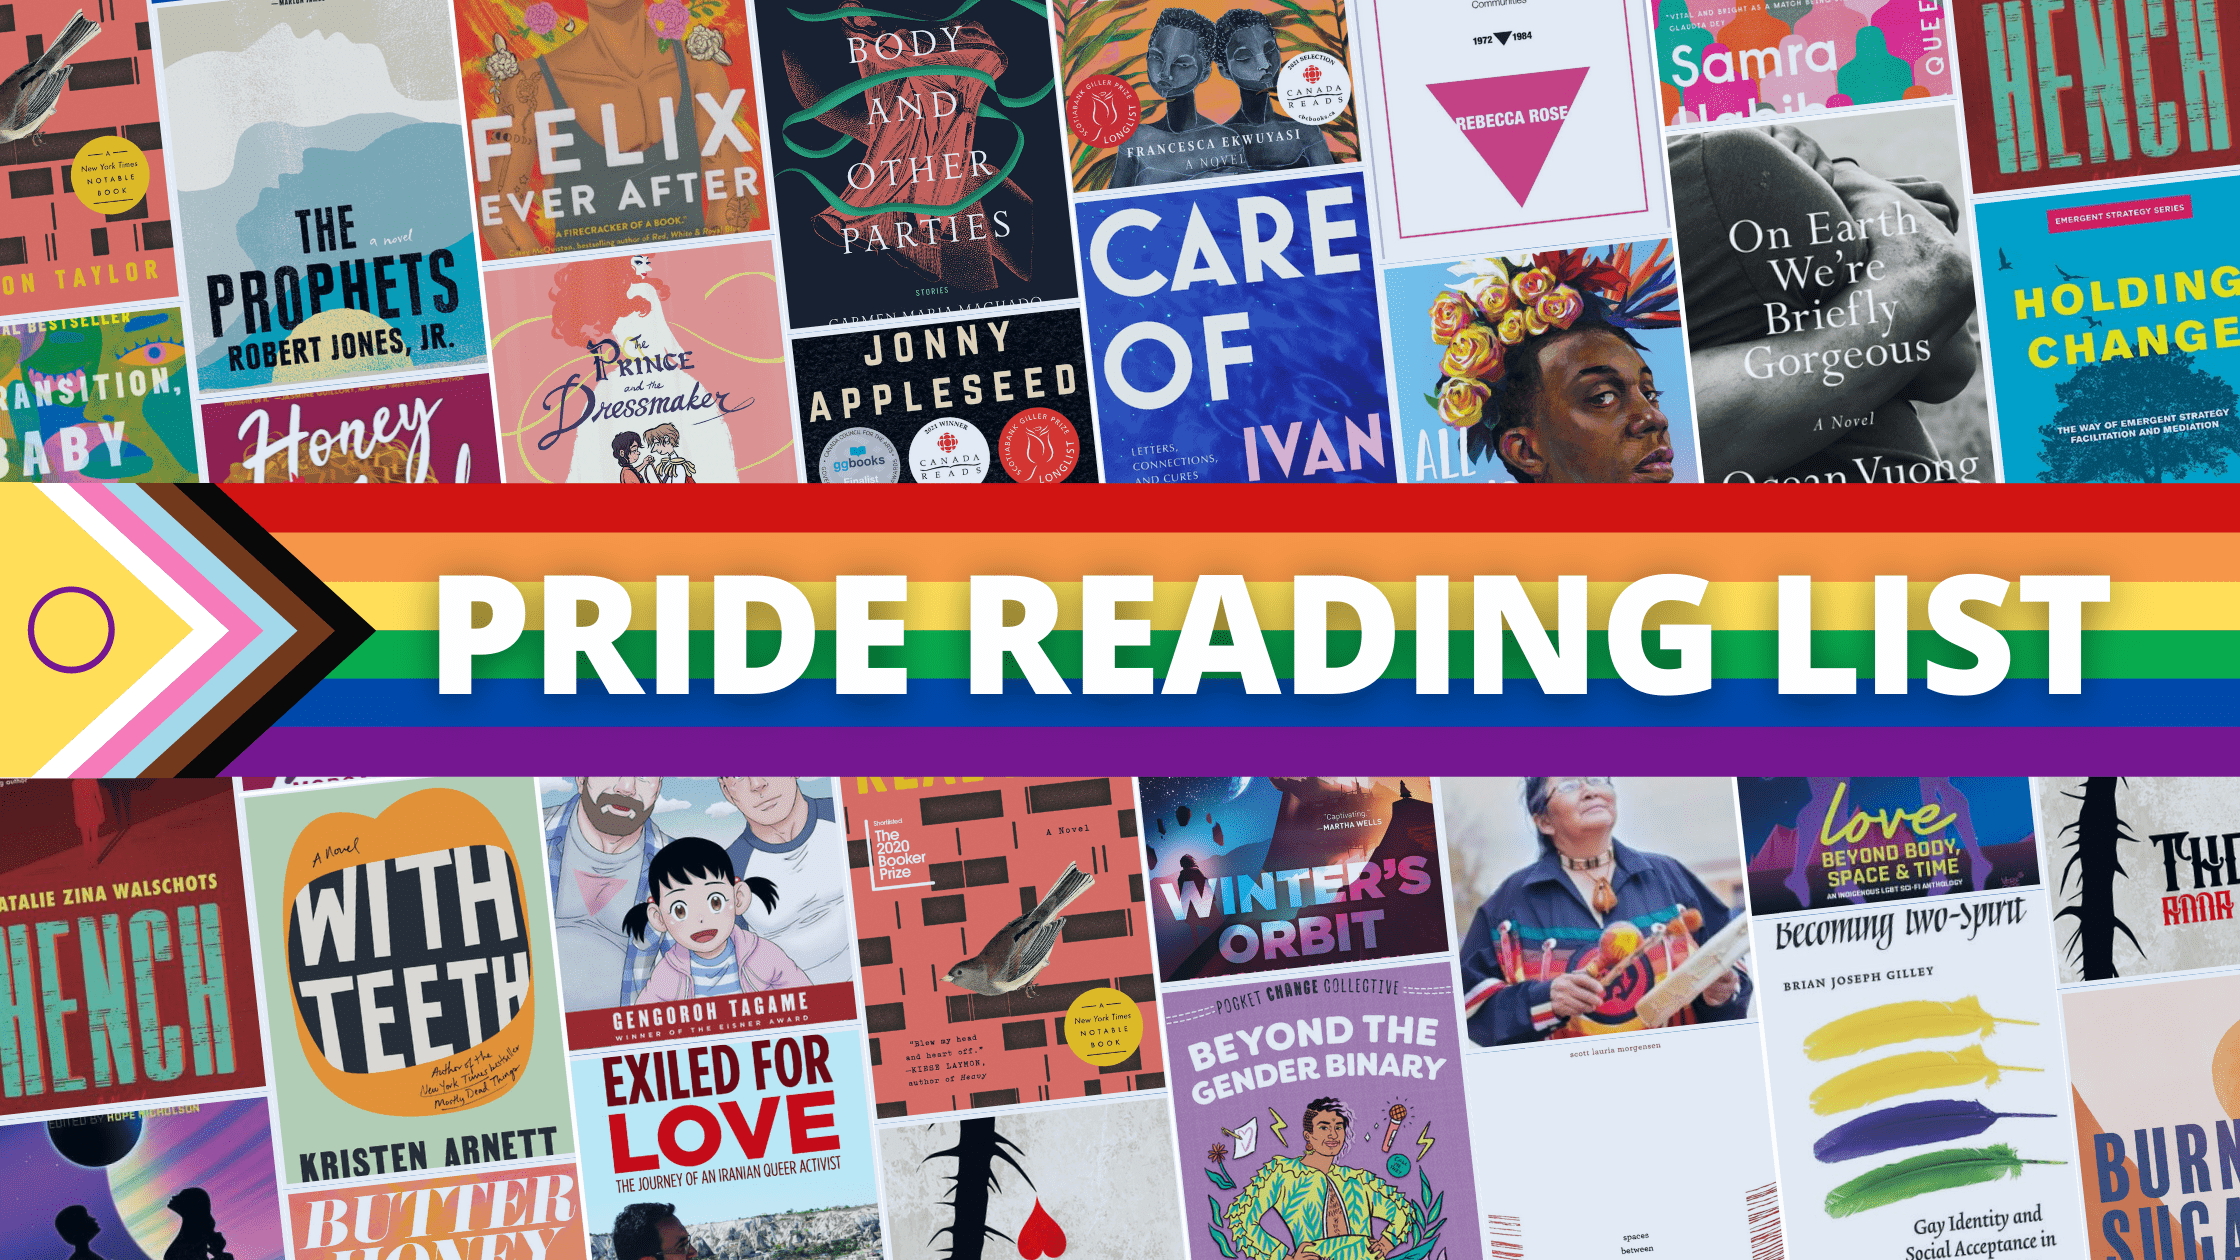 collage of book titles with the Pride flag in the centre and text that reads "PRIDE READING LIST"